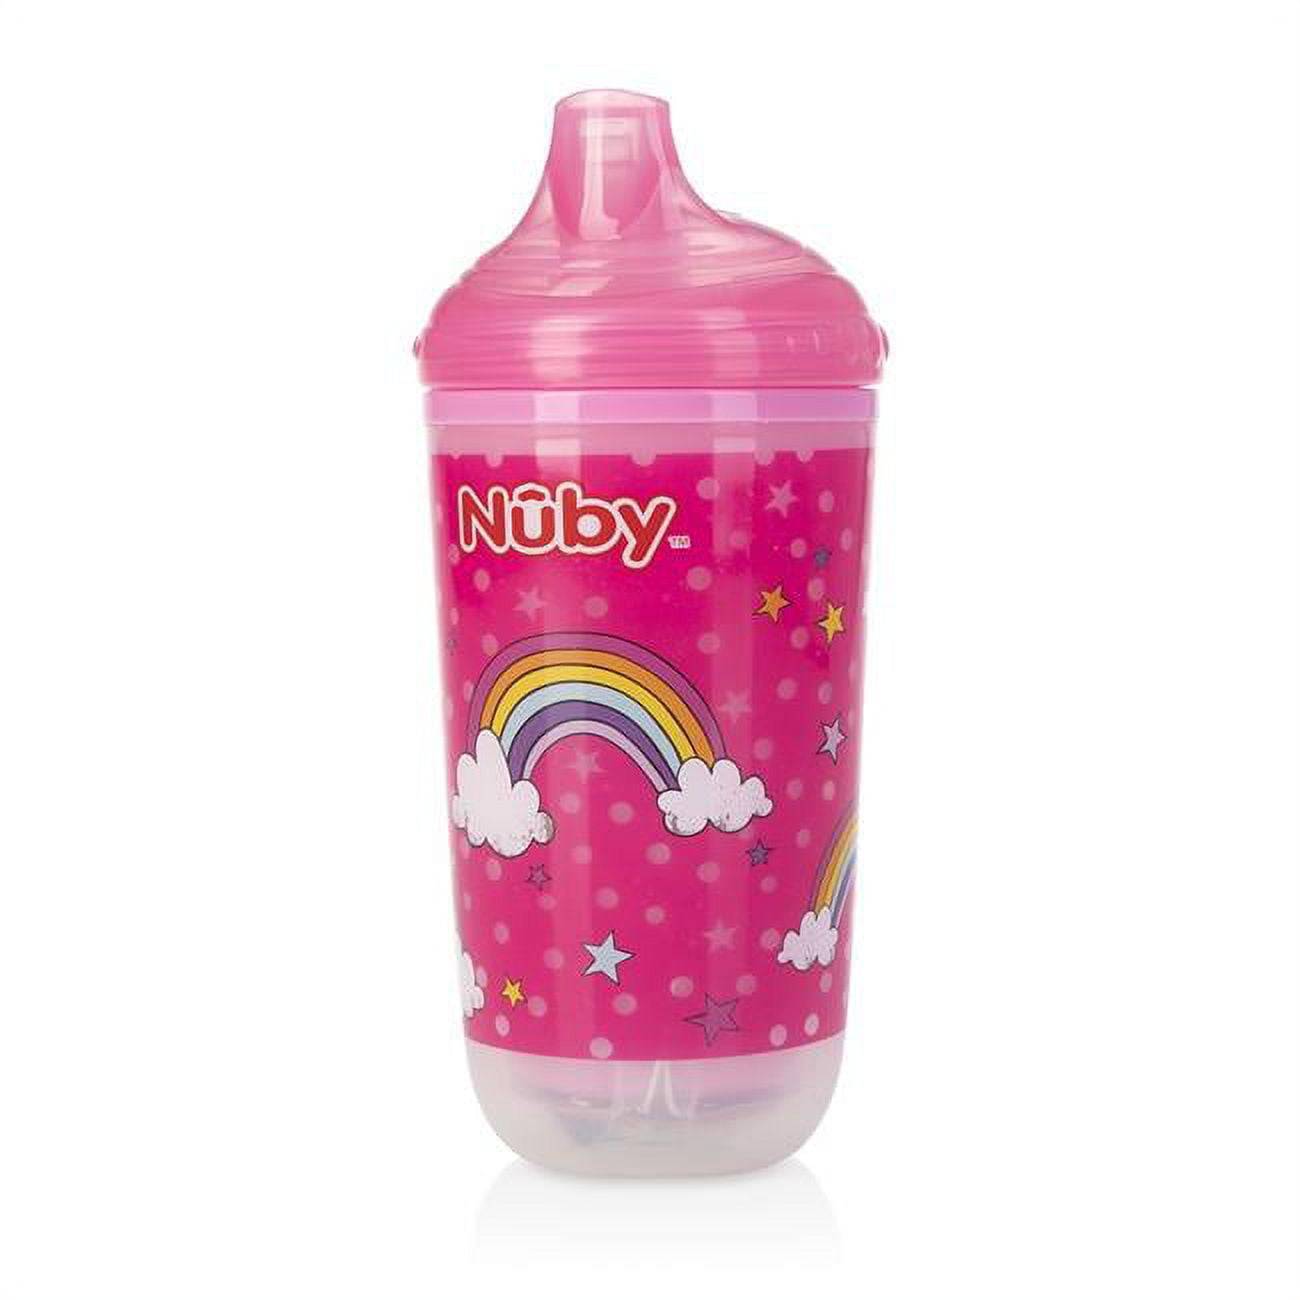 Picture of DDI 2346685 Nuby? Insulated Light-Up No Spill Sippy Cup - Rainbow  Pink  10 oz Case of 24